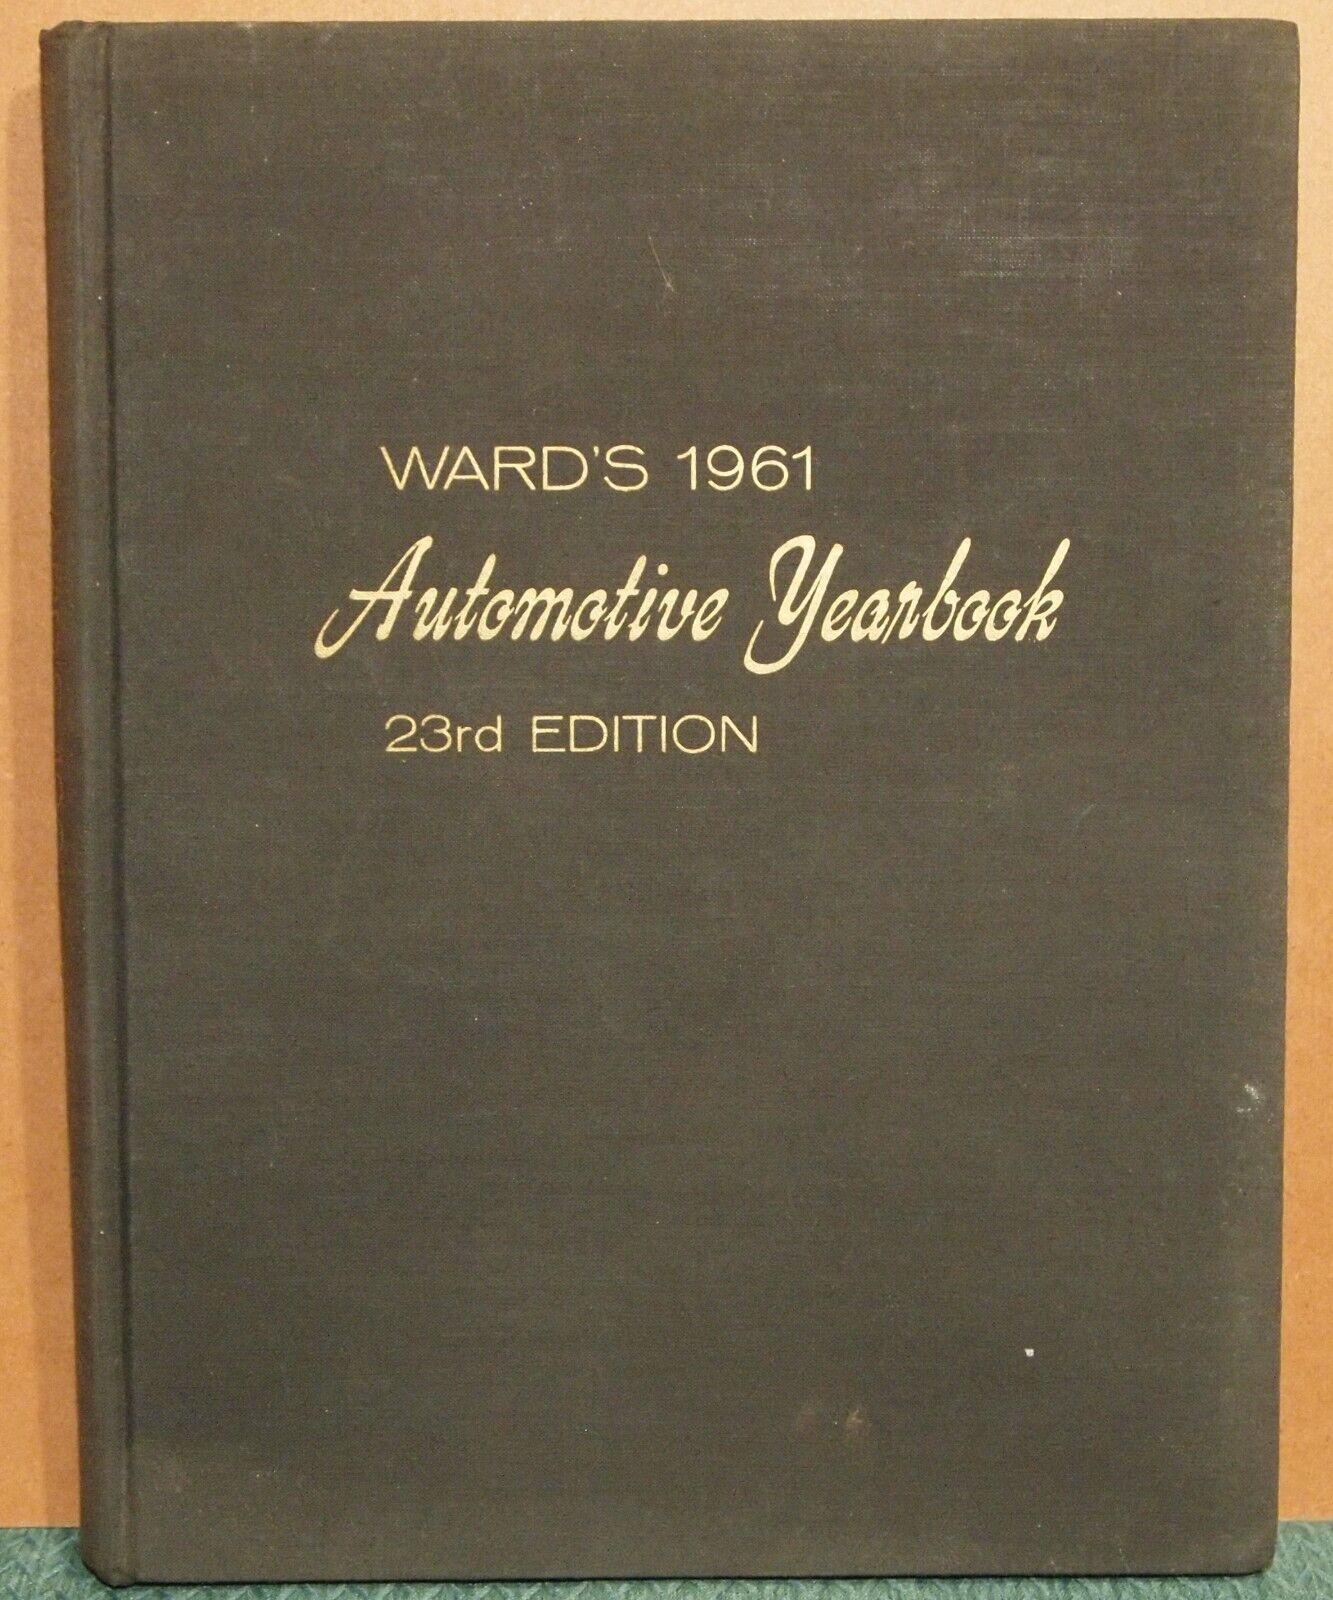 1961 WARD'S AUTOMOTIVE YEARBOOK 23rd edition WARDS-51